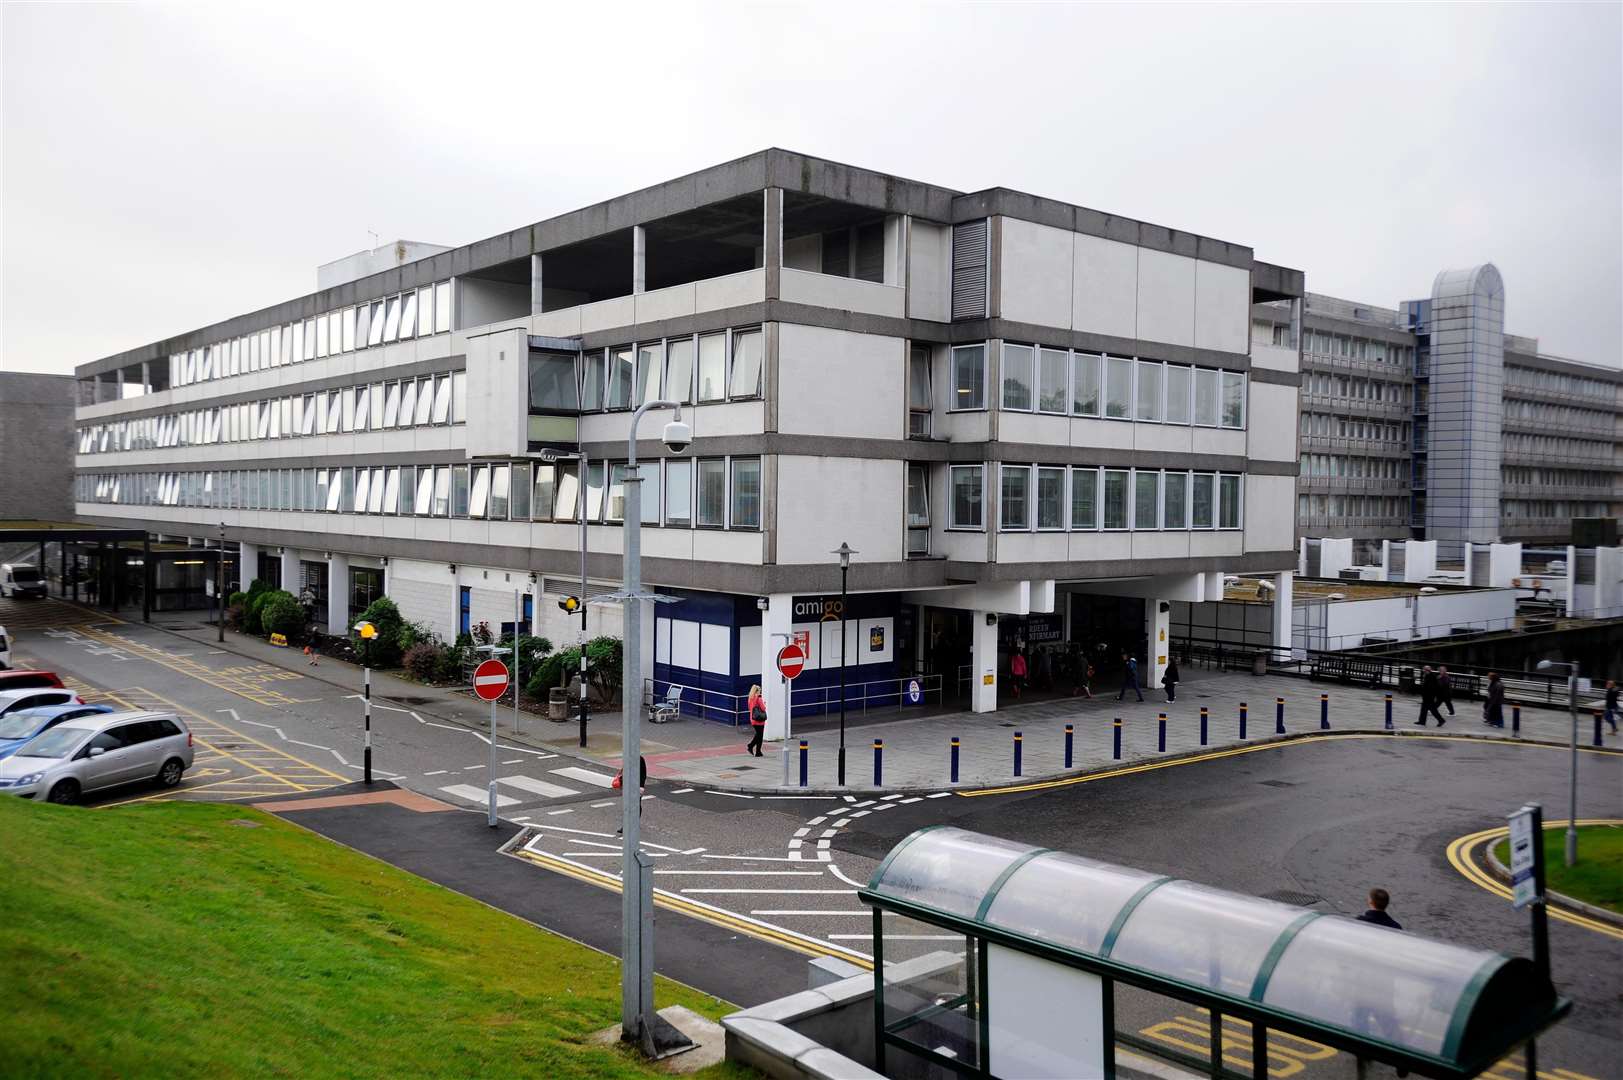 There are concerns over cancer treatment waiting times in the NHS Grampian area.